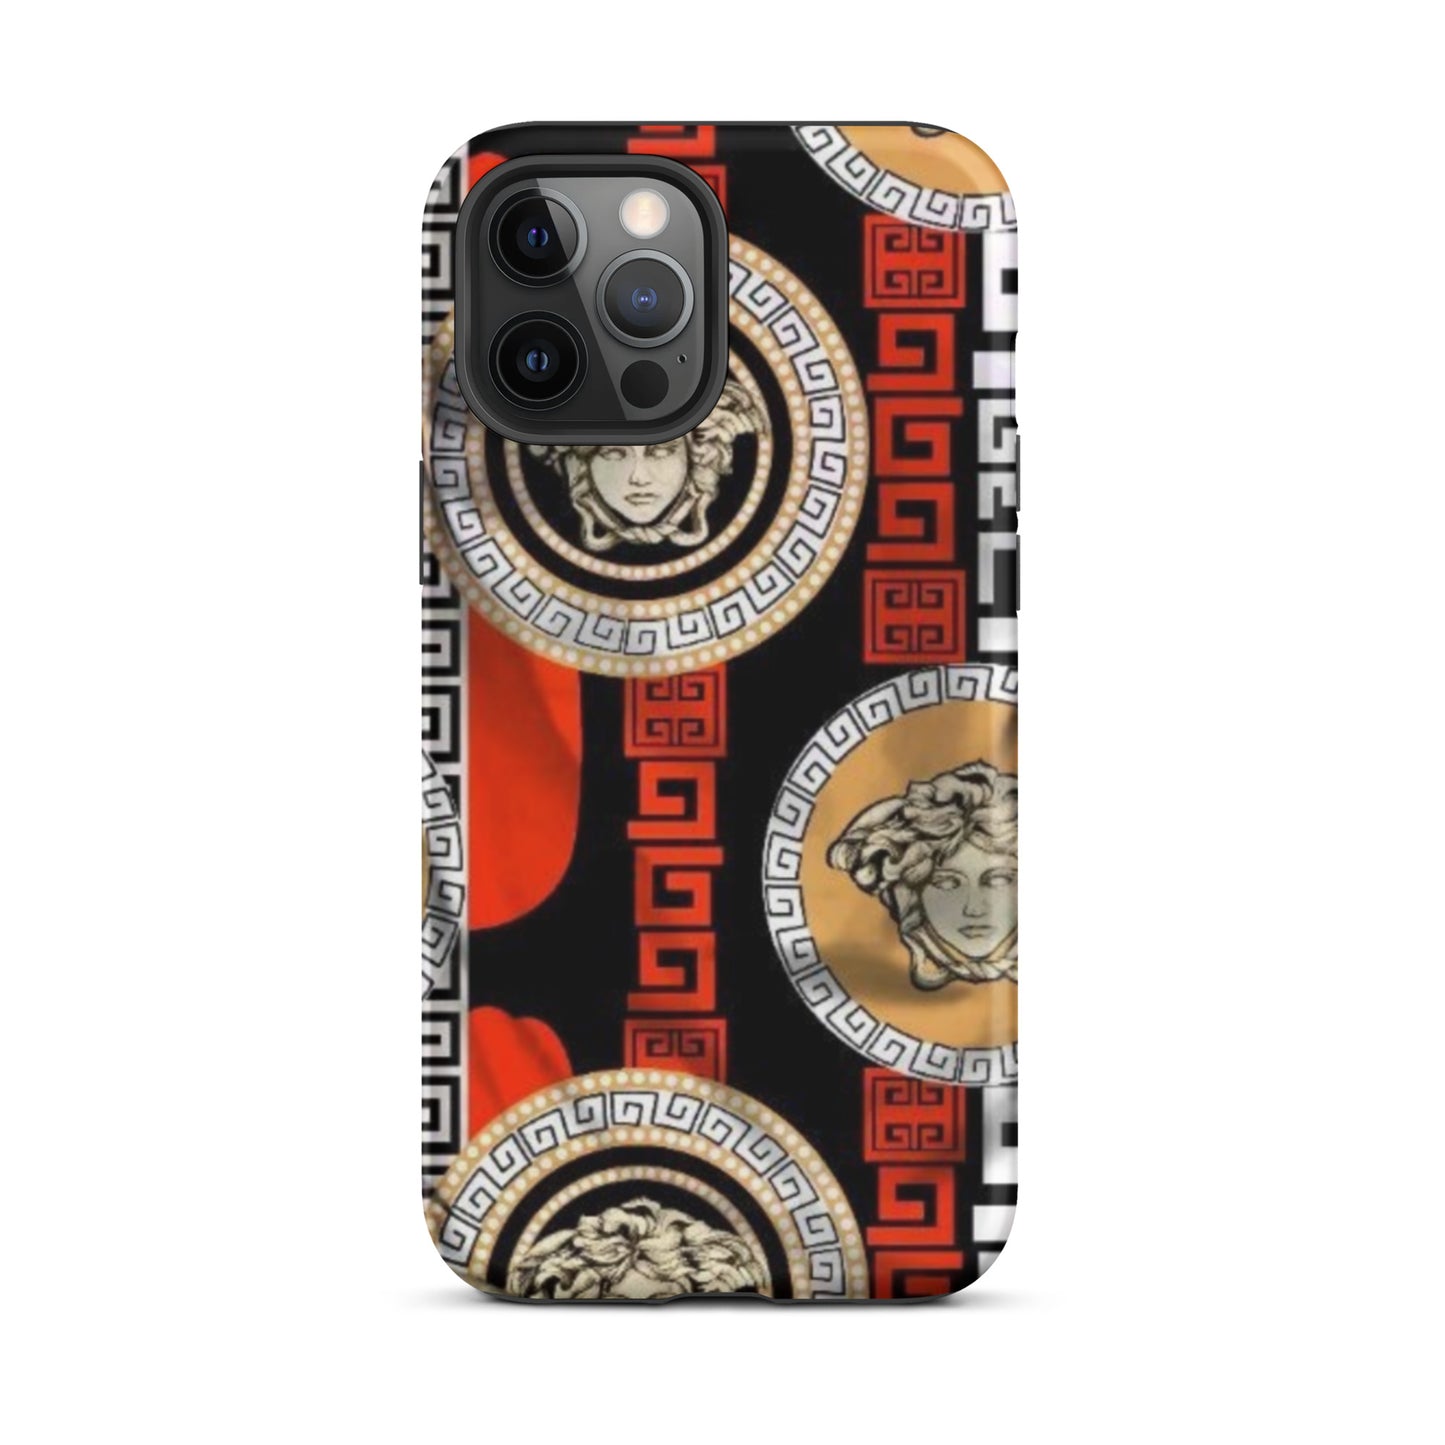 "Exclusive DOPiFiED" Tough iPhone case